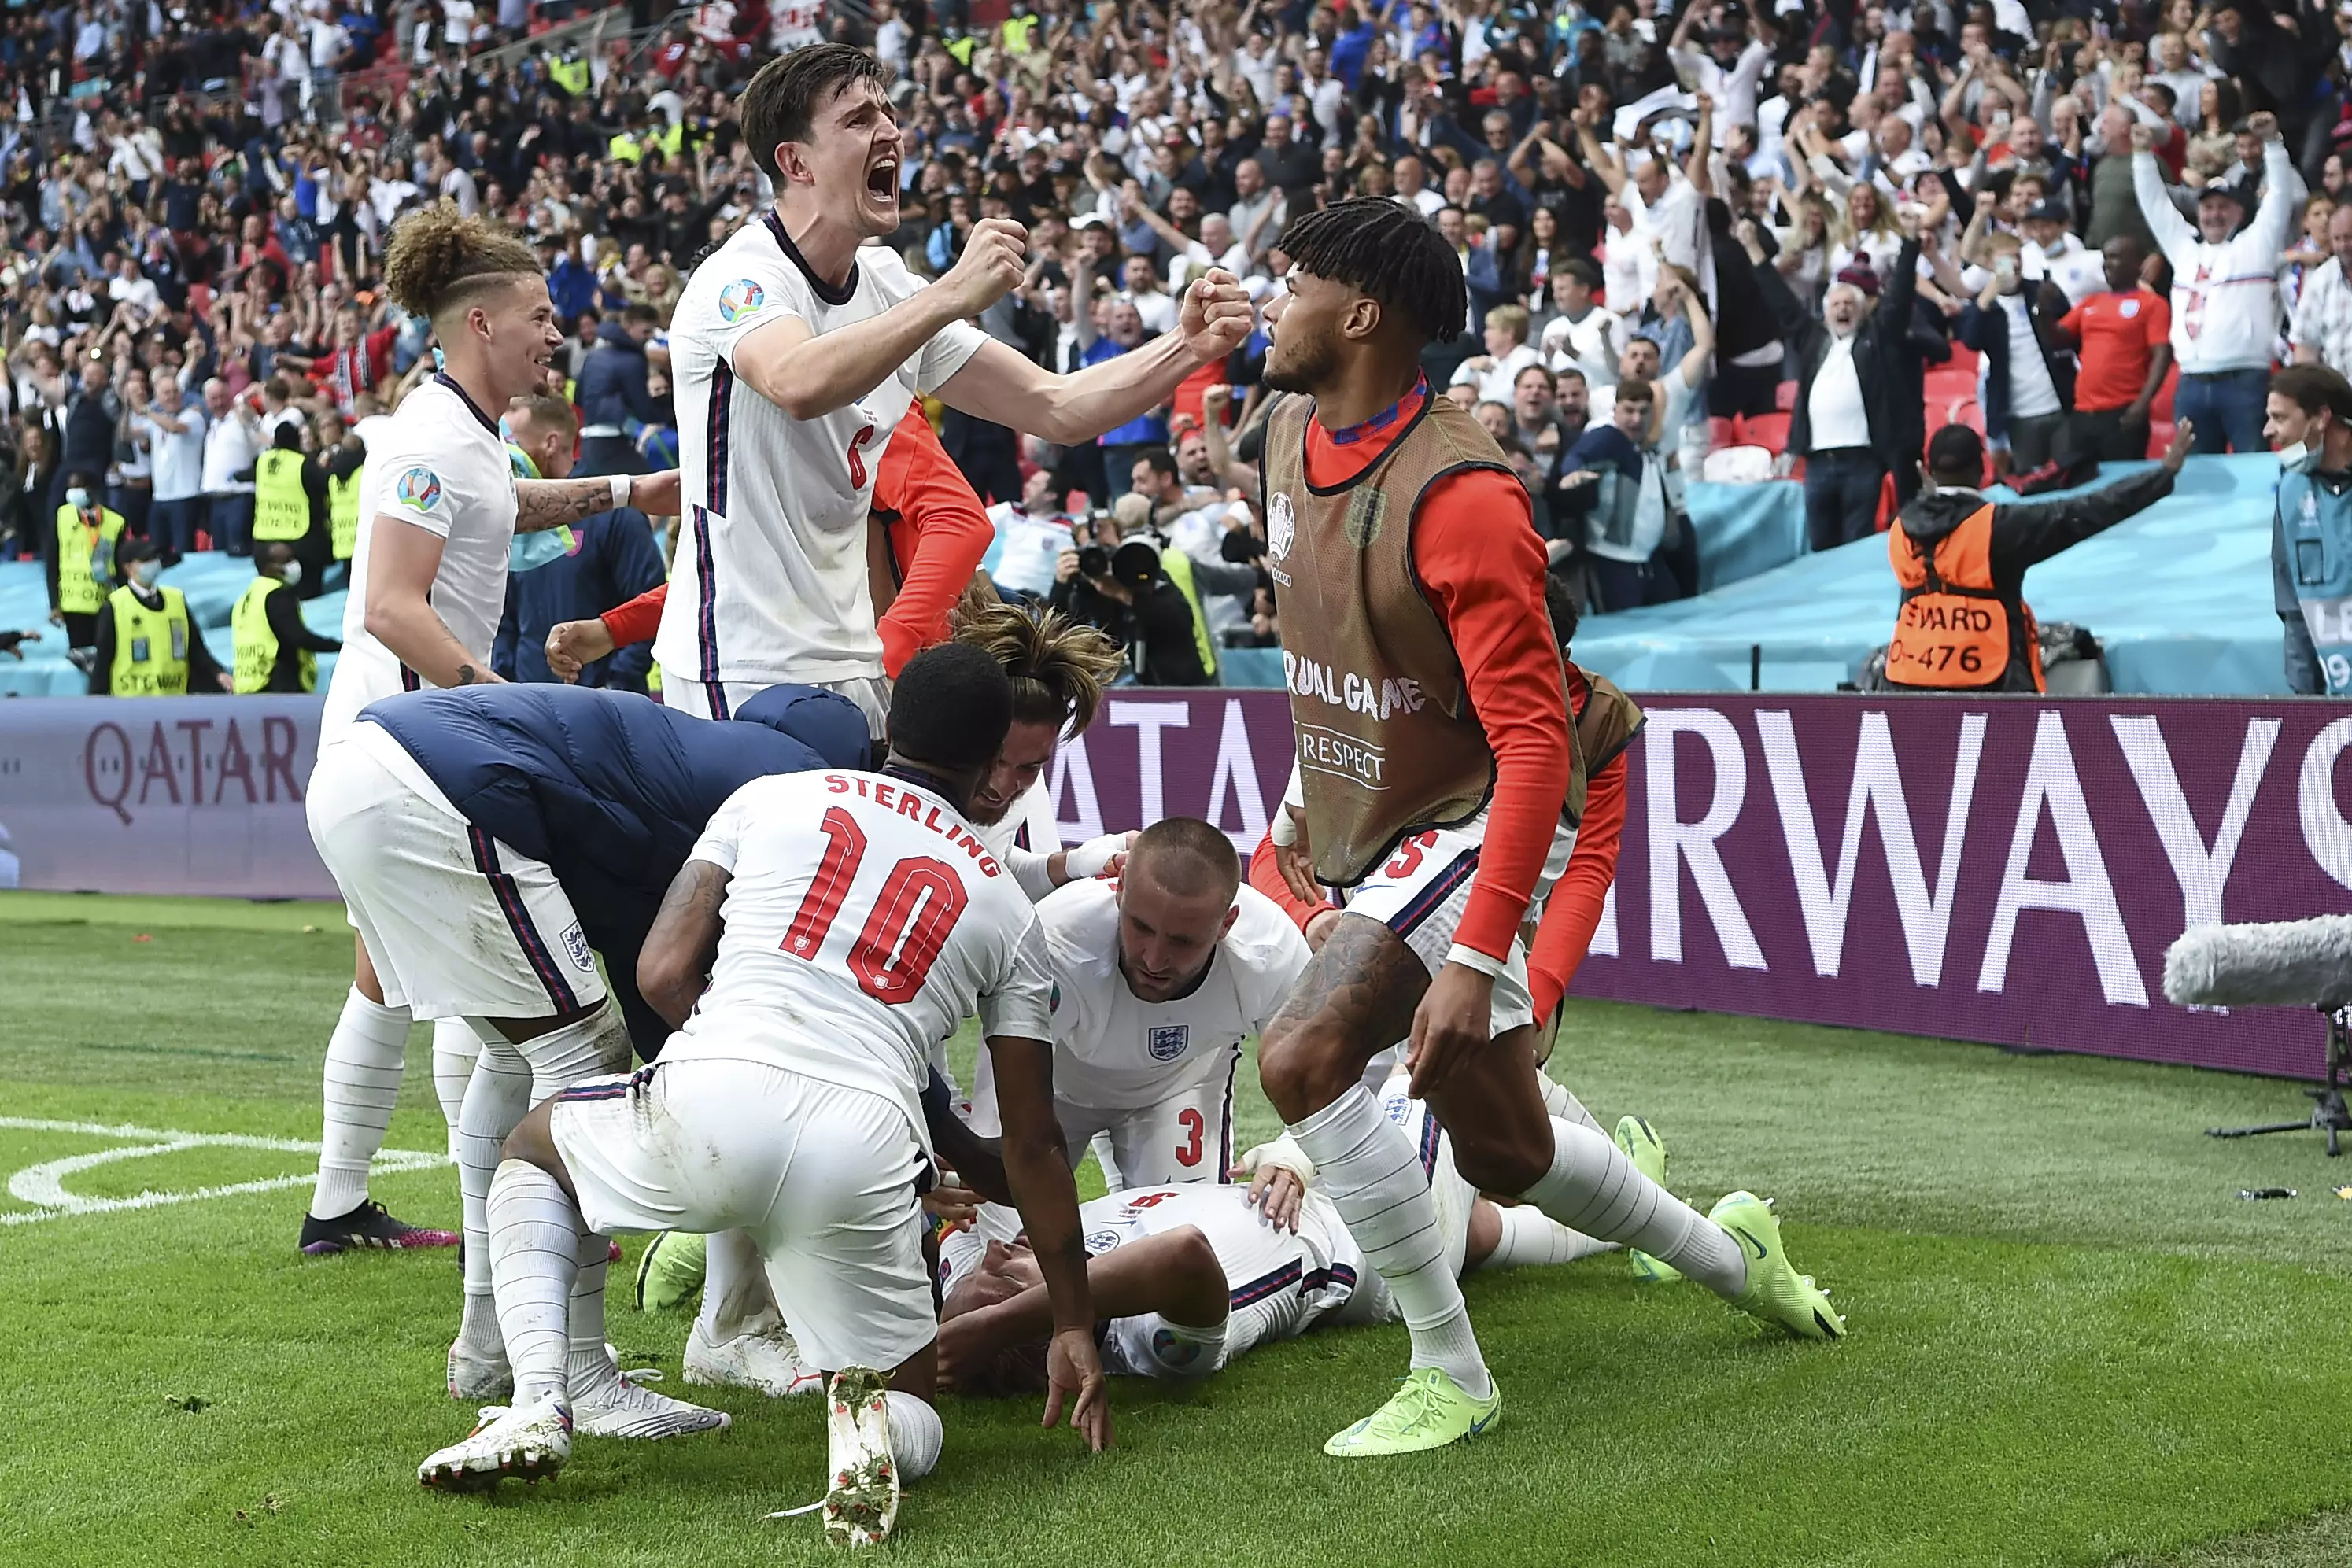 A win over Ukraine would see England reach the semi-finals in back-to-back major international competitions